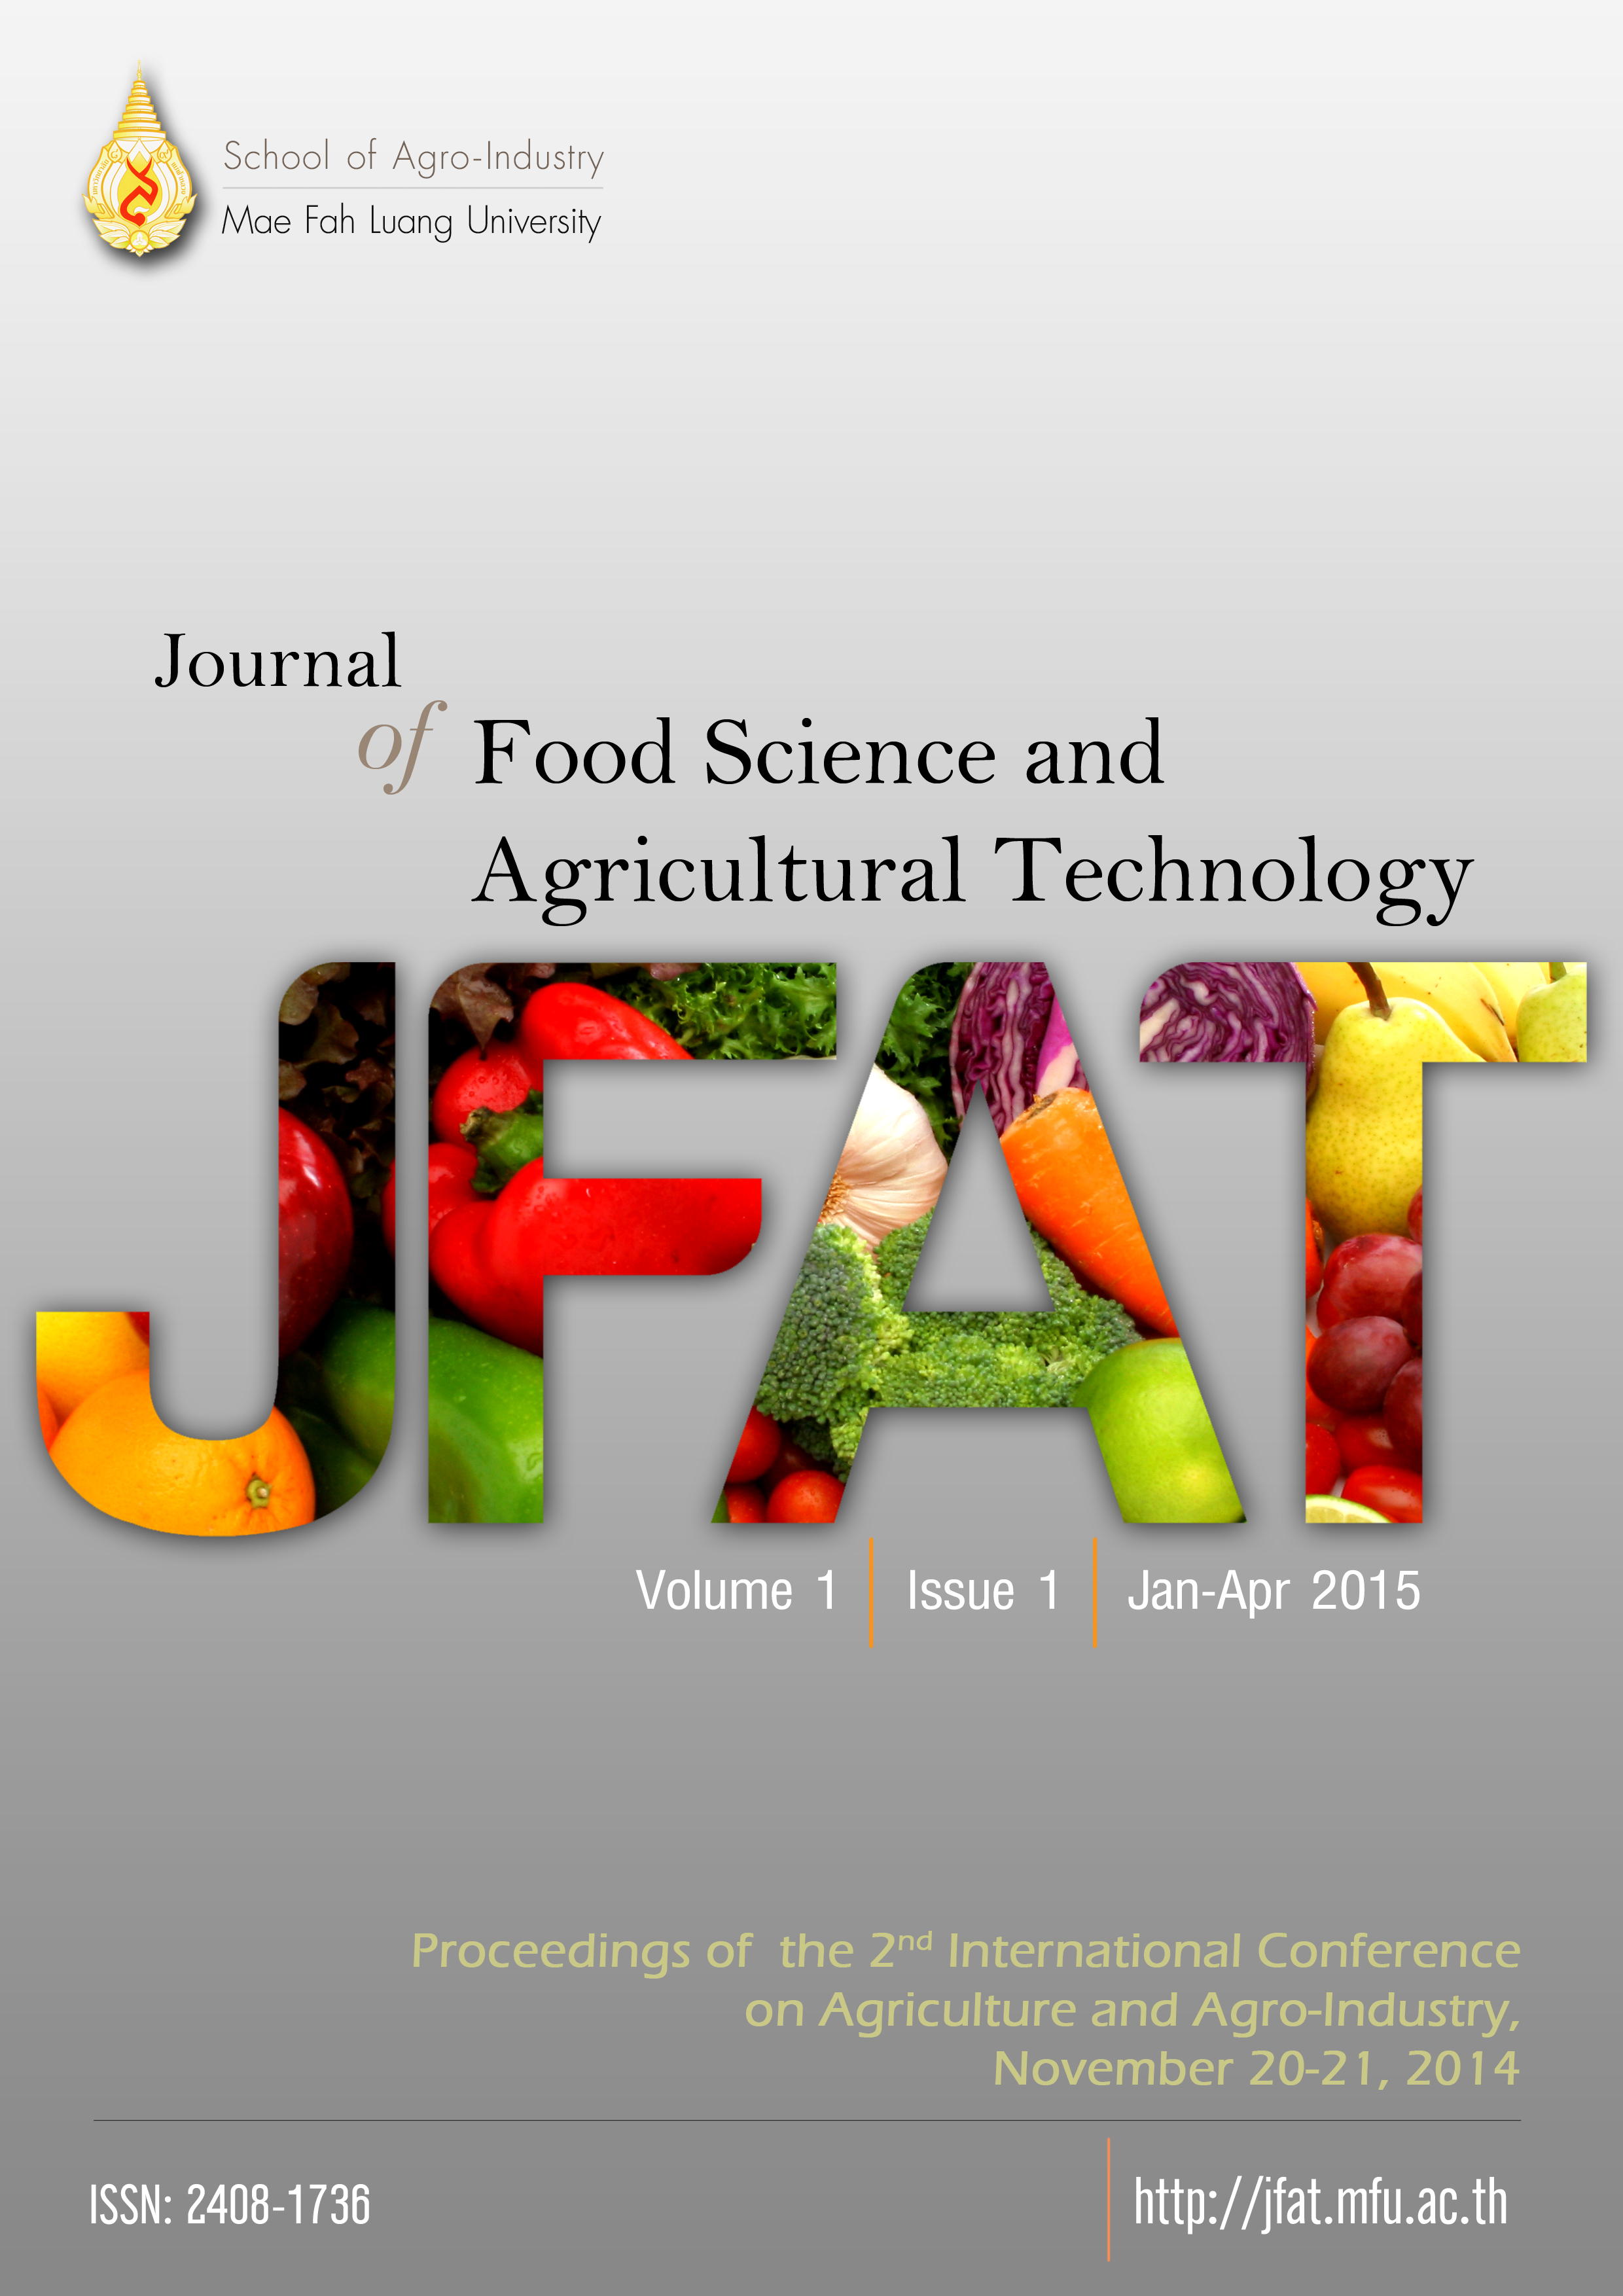 					View Vol. 1: Proceedings of the 2nd International Conference on Agriculture and Agro-Industry
				